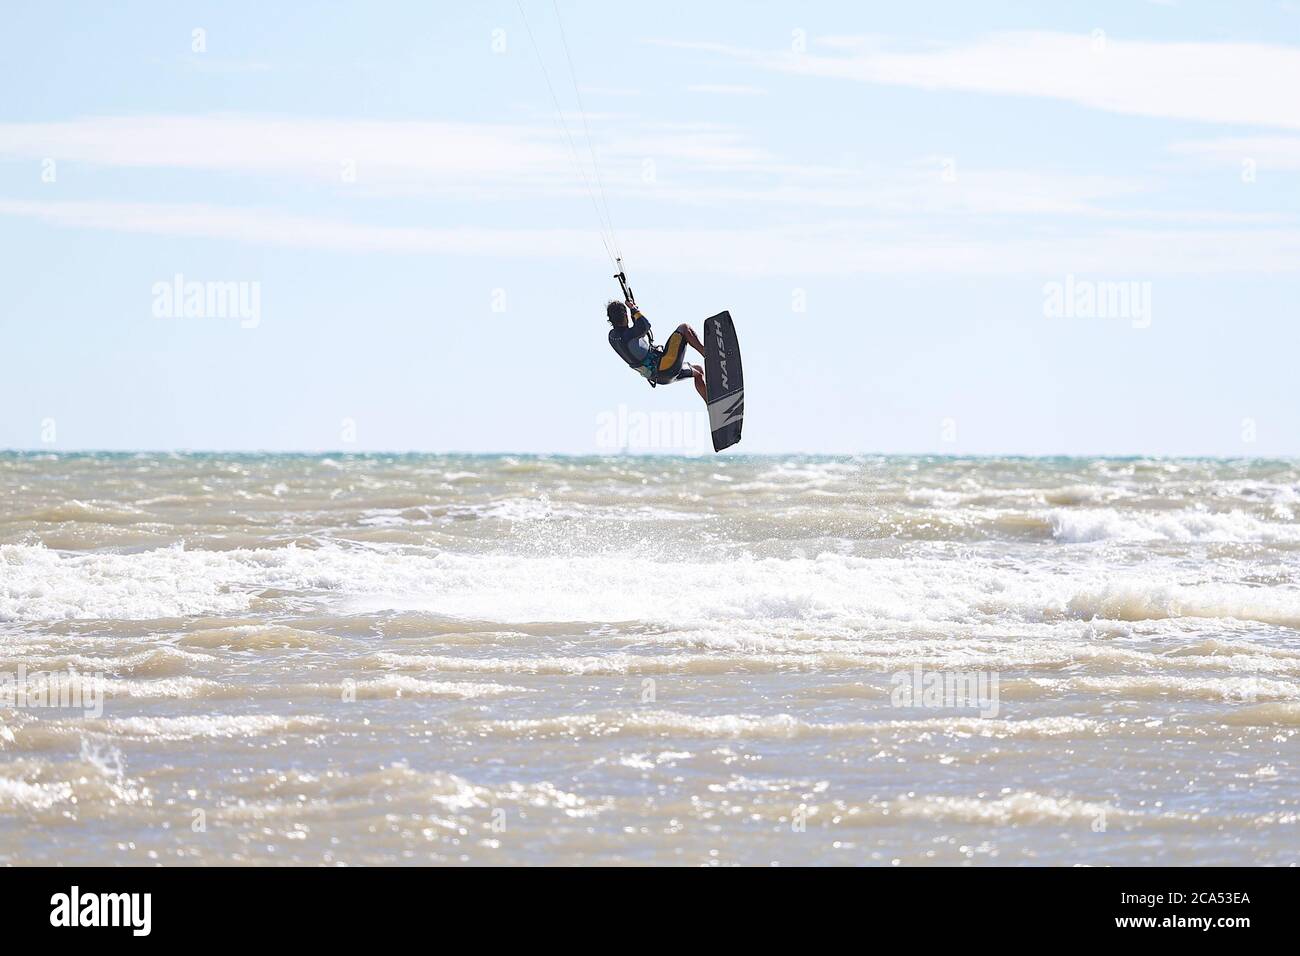 Camber, East Sussex, UK. 04 Aug, 2020. UK Weather: The wind has picked up which is Ideal for these kite surfers who take advantage of the blustery conditions before the predicted heatwave in the coming days. Photo Credit: Paul Lawrenson-PAL Media/Alamy Live News Stock Photo